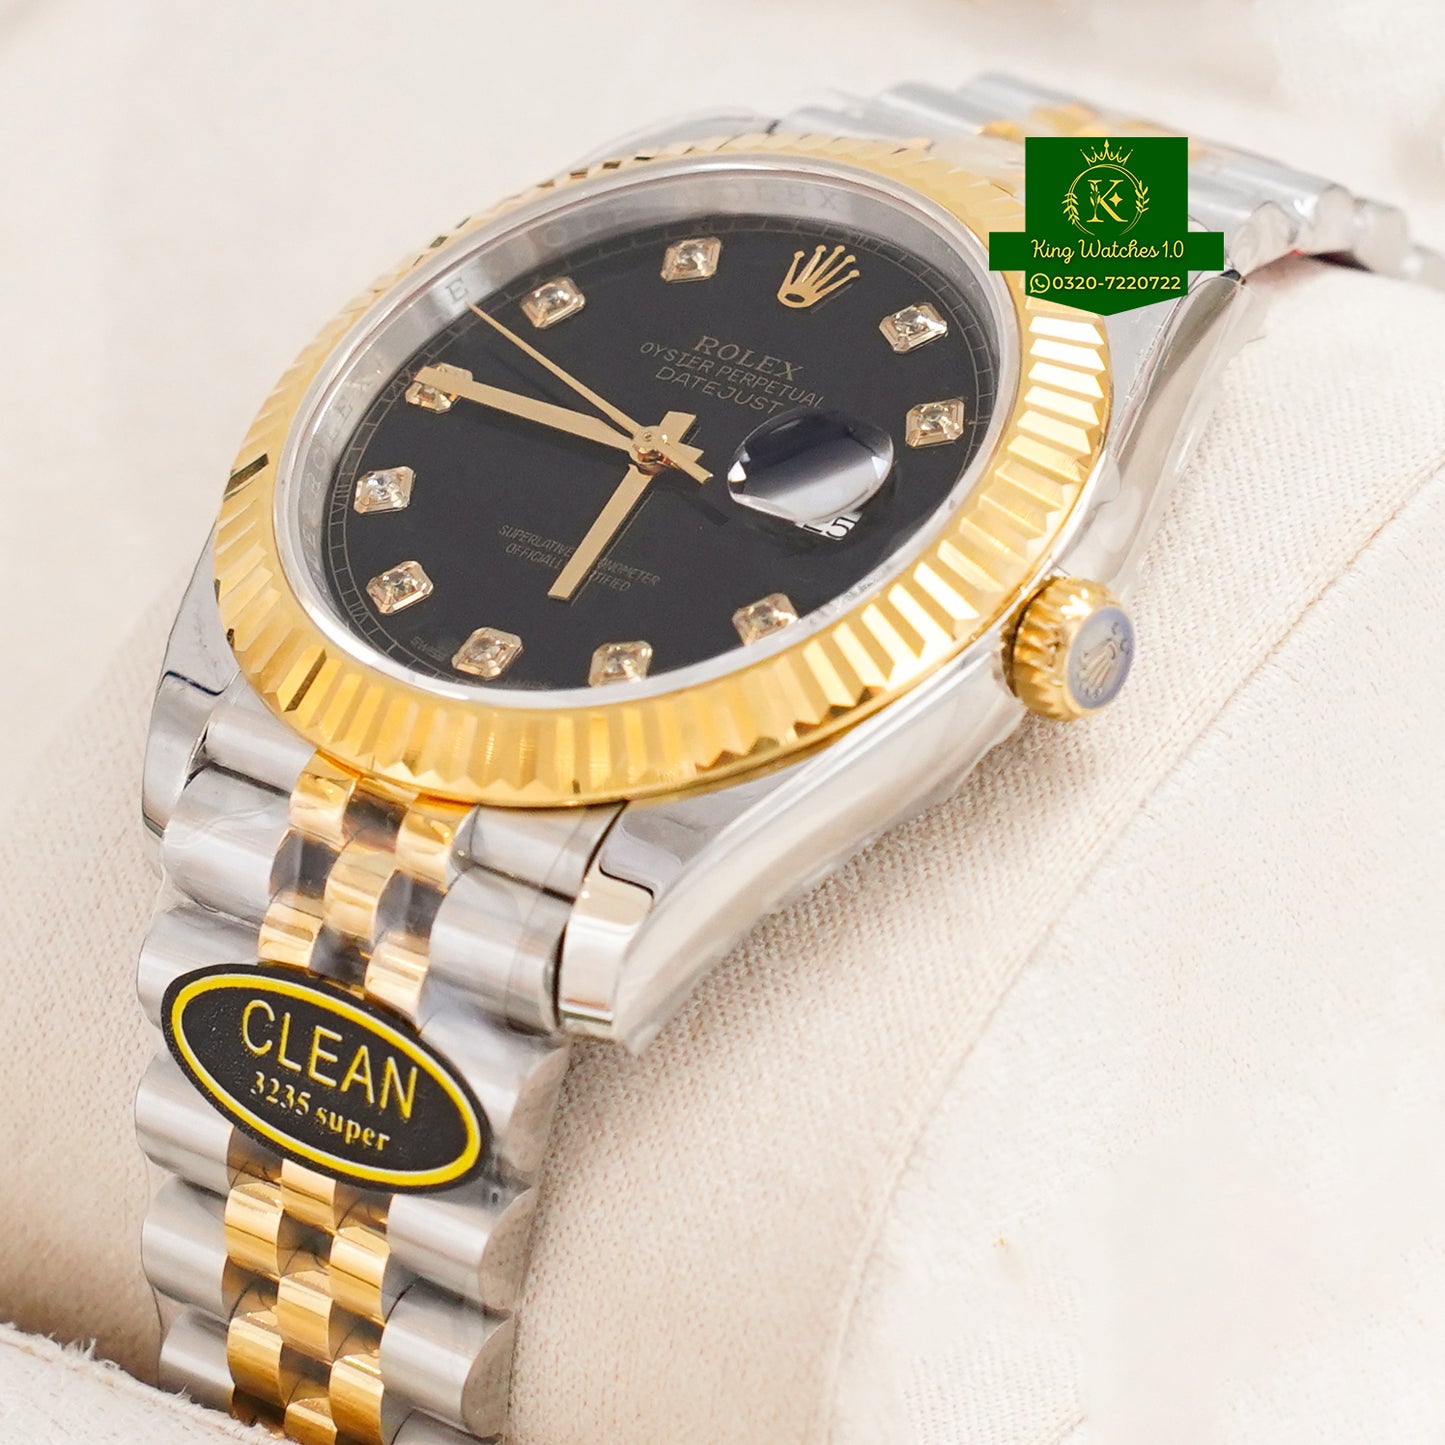 Datejust 41 Clean made